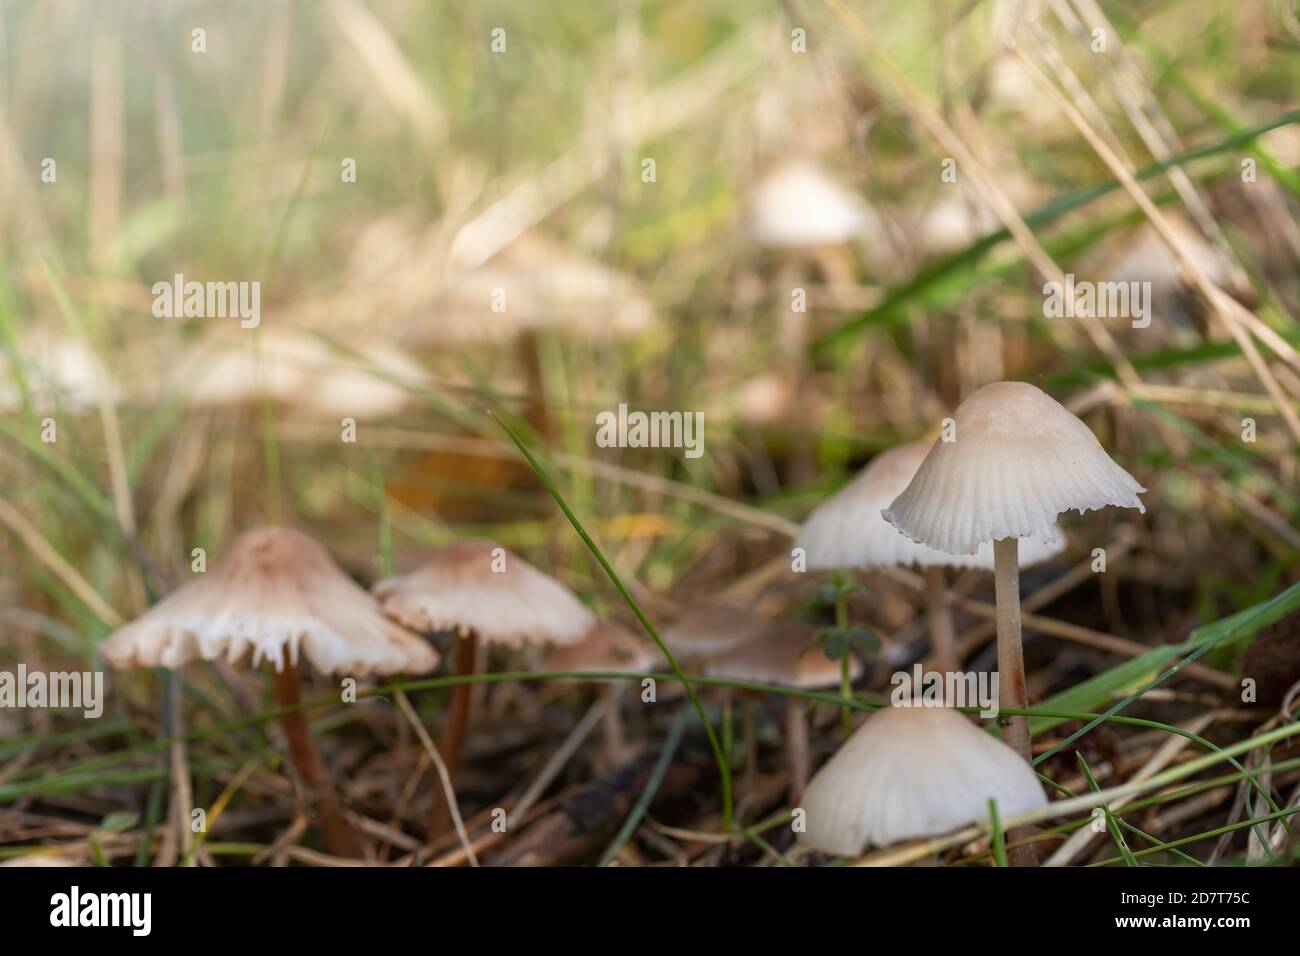 Group of earthy inocybe wild poisonous mushrooms closeup in autumn nature. Stock Photo